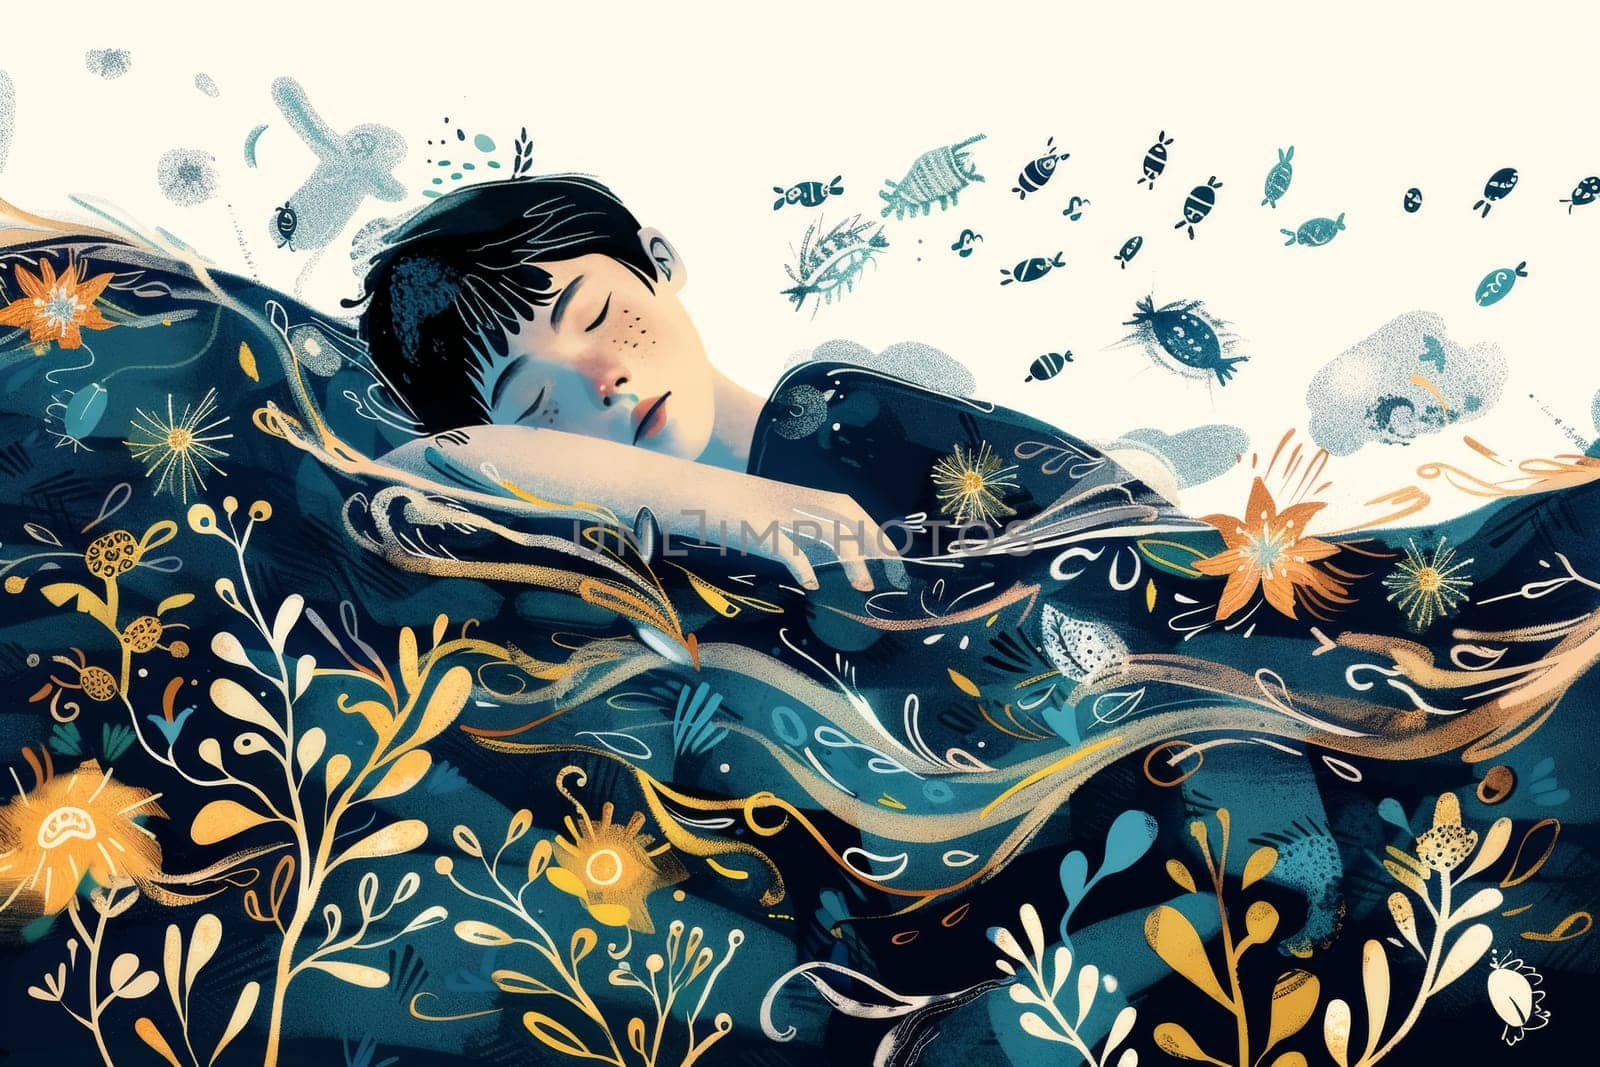 Artistic illustration of a child sleeping with underwater flora and fauna. Colorful digital painting. Fantasy dreams and underwater world concept. Design for children's book illustration or educational content